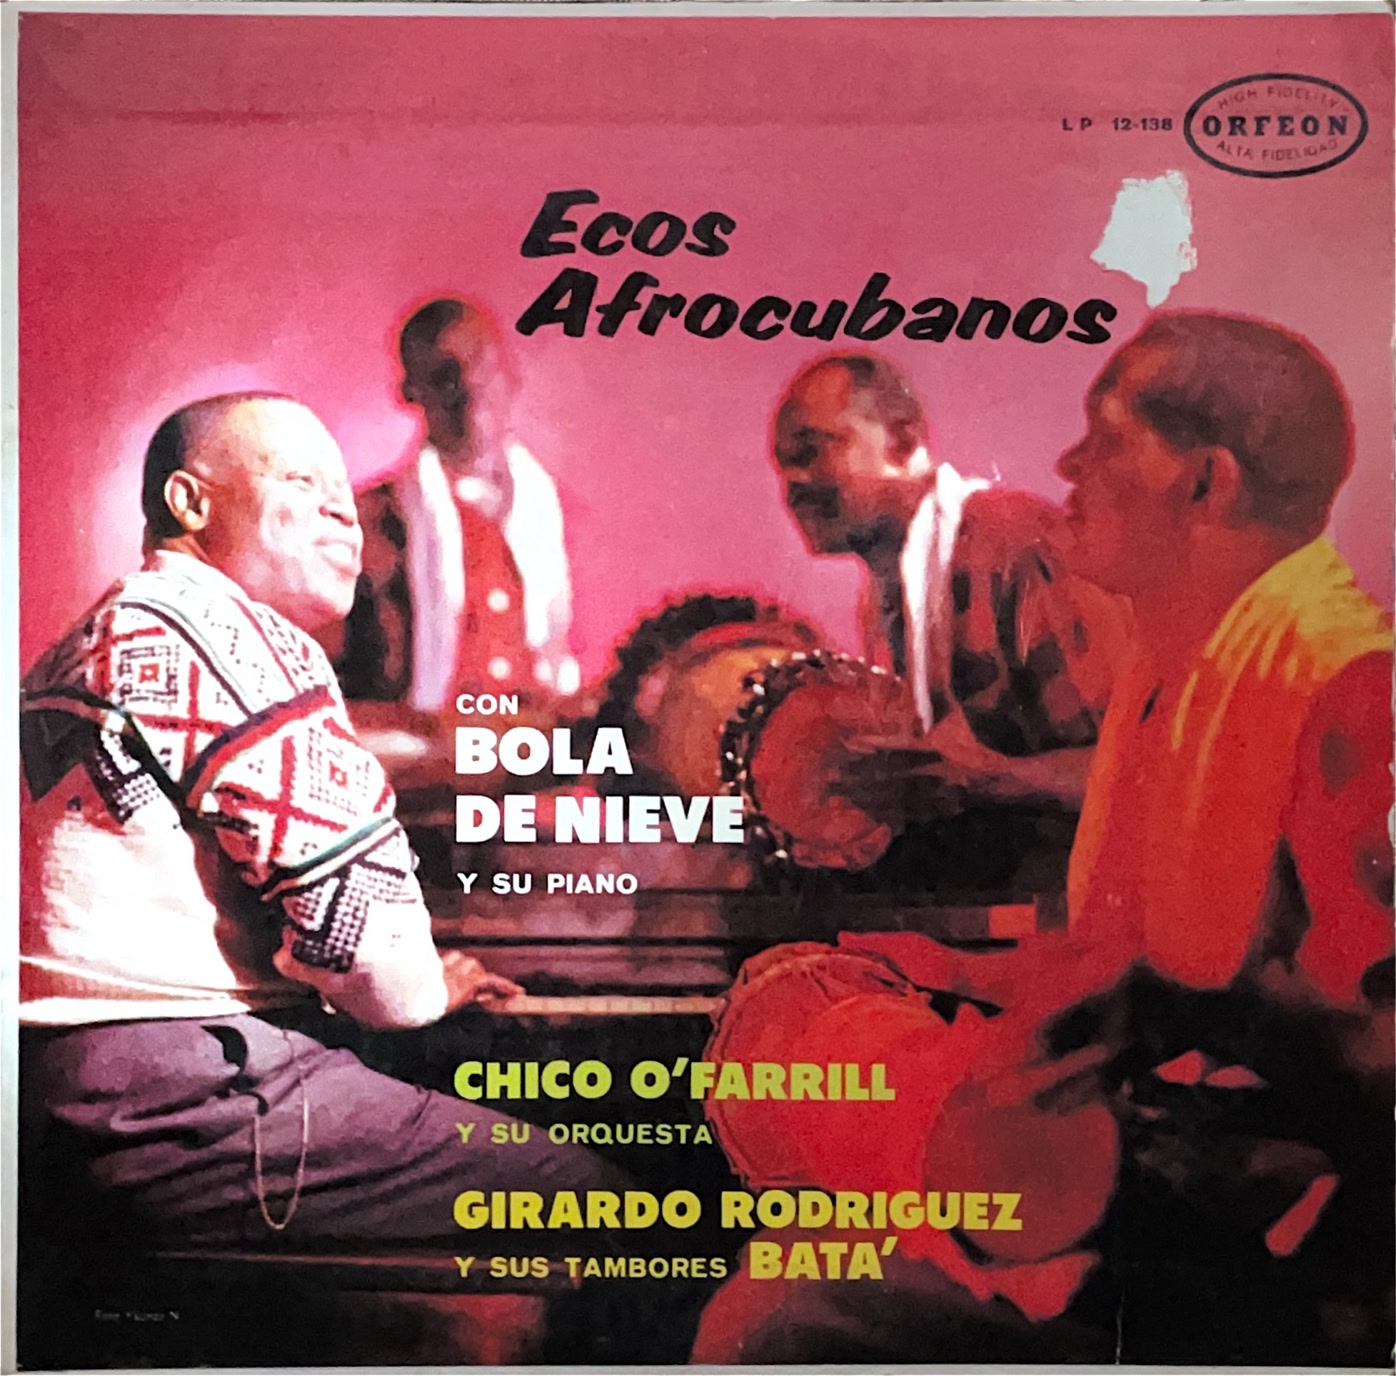 Snowball And His Piano, Chico O'Farrill And His Orchestra, Girardo Rodriguez And His Batá Drums – Afro-Cuban Echoes